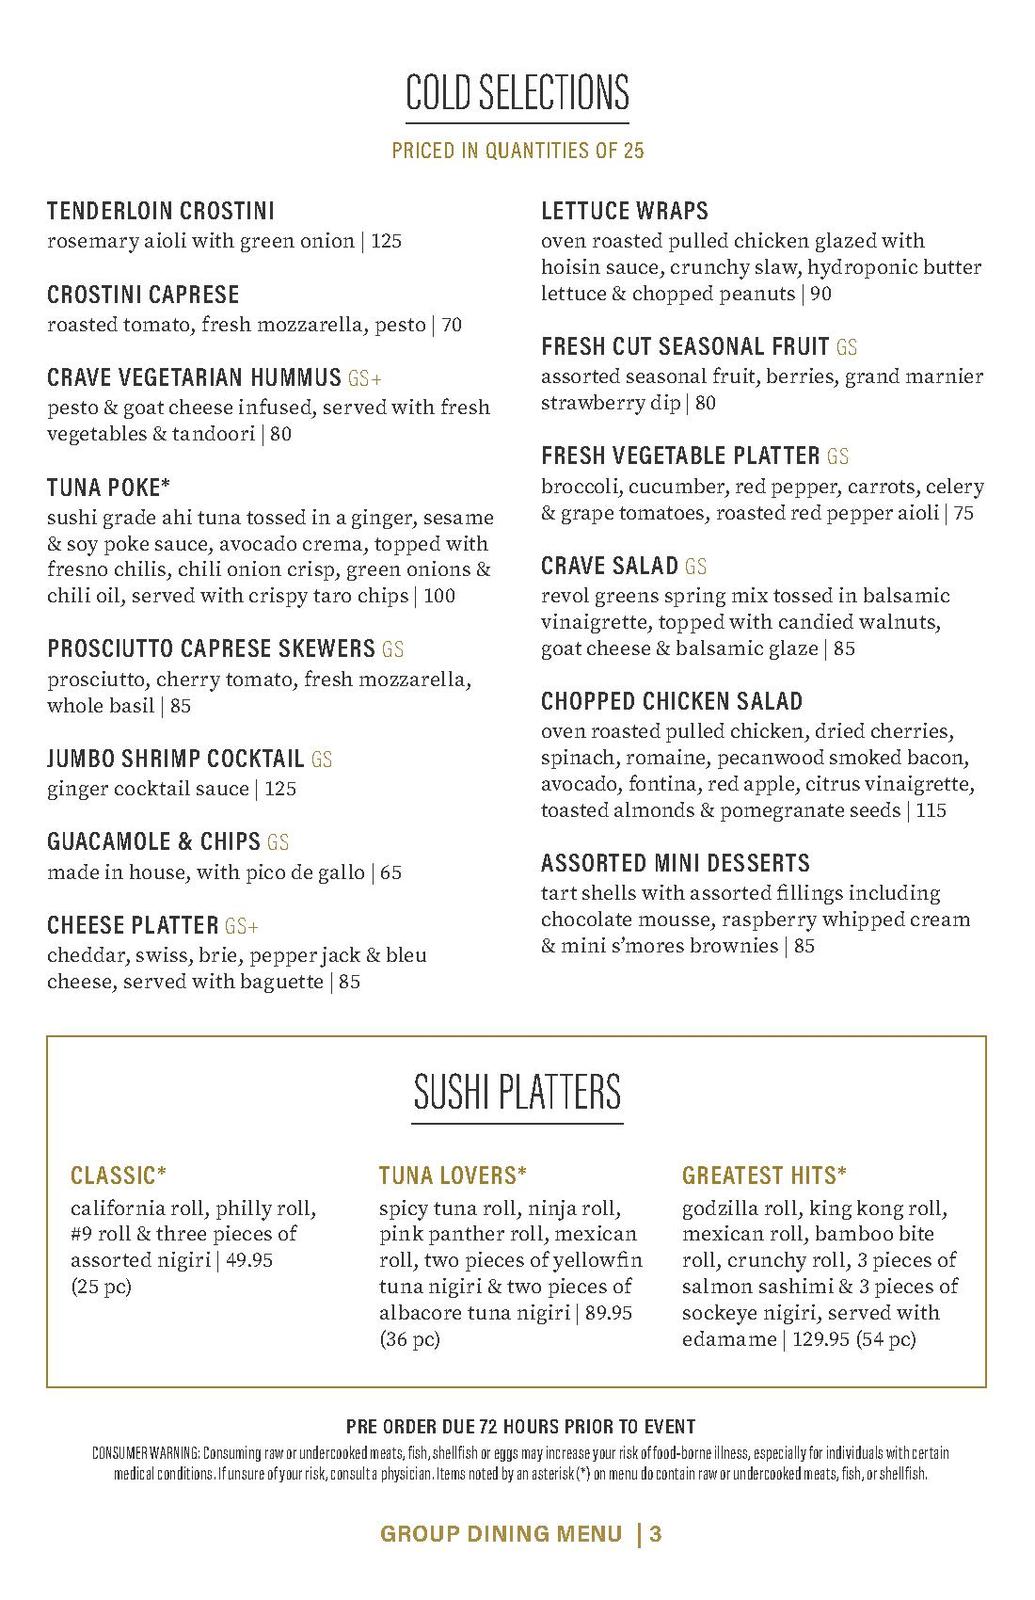 Group Dining Menu for Private Parties 3